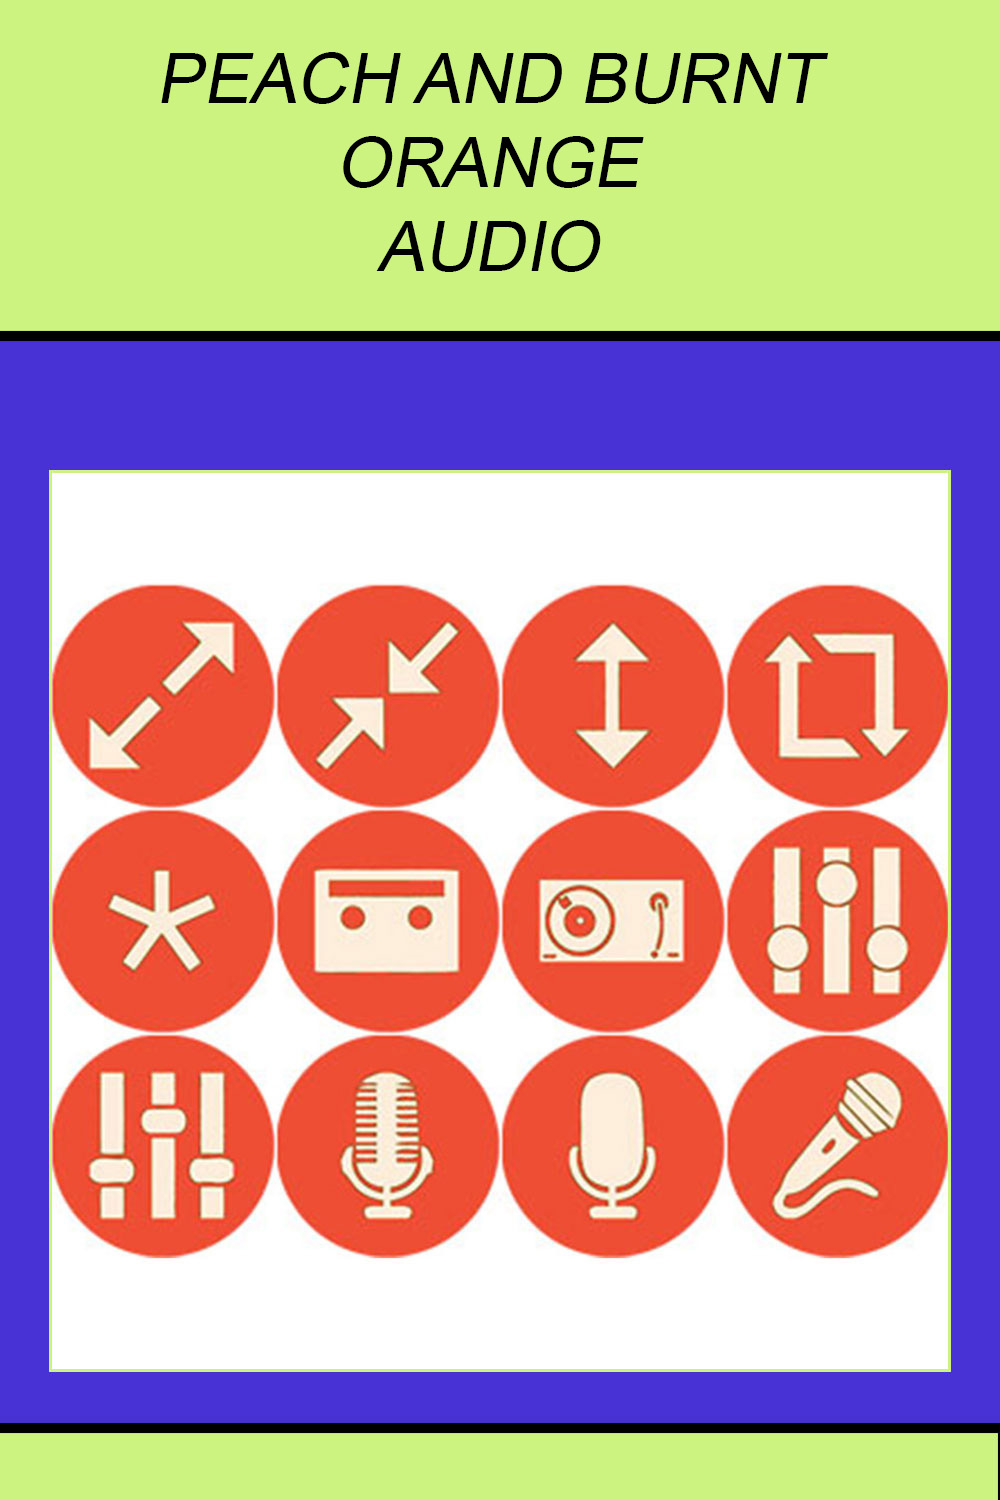 PEACH AND BURNT ORANGE AUDIO ROUND ICONS pinterest preview image.